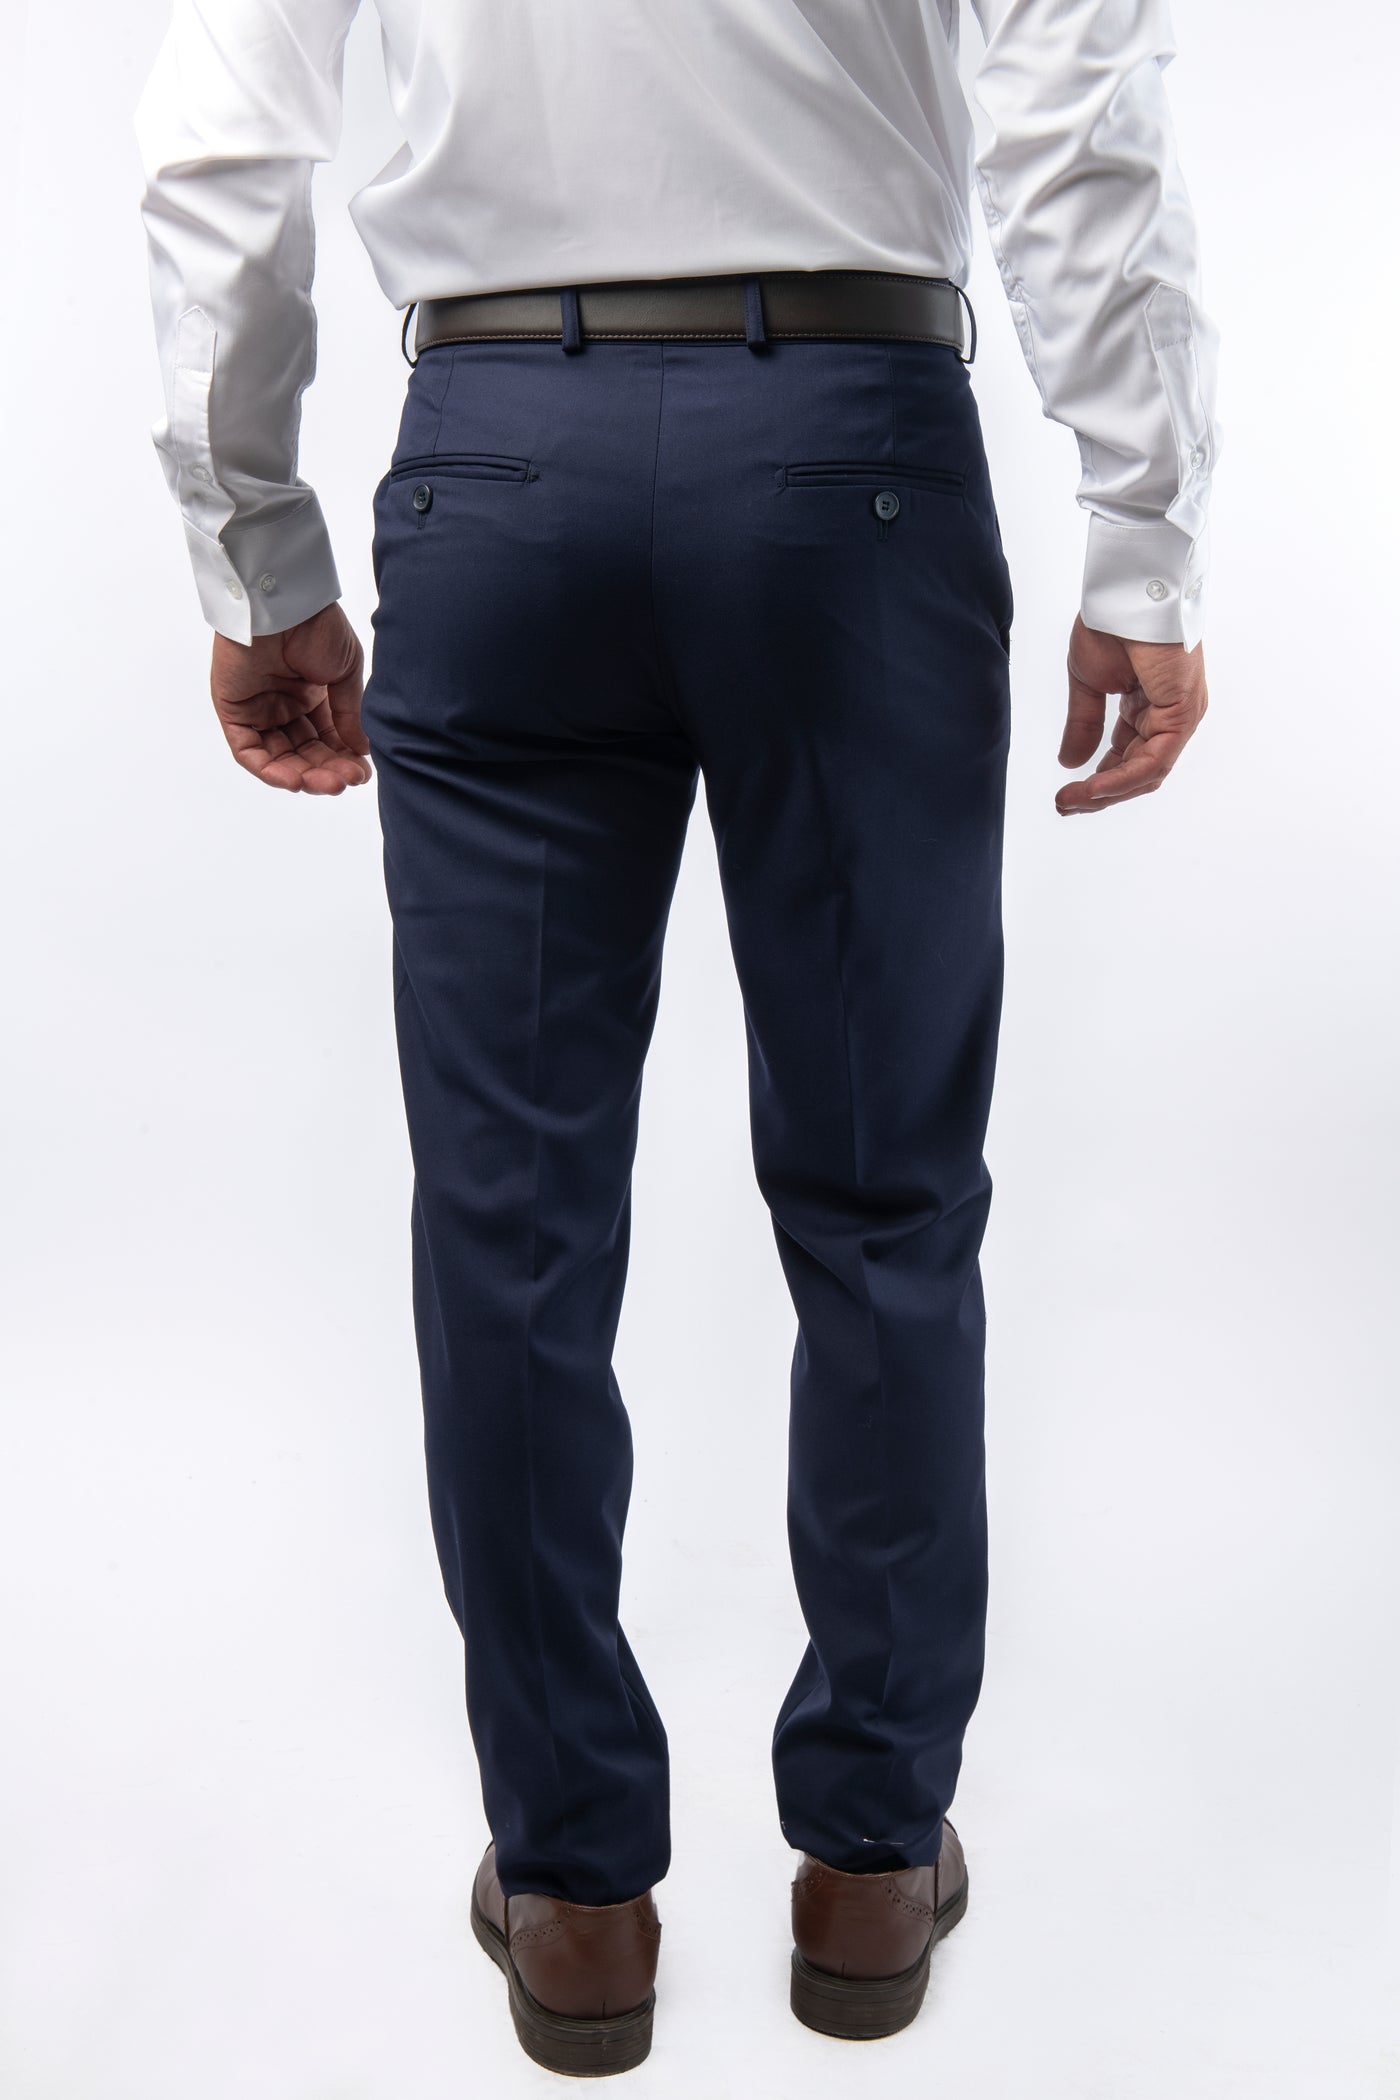 Solid Navy Twill  Classic Pant